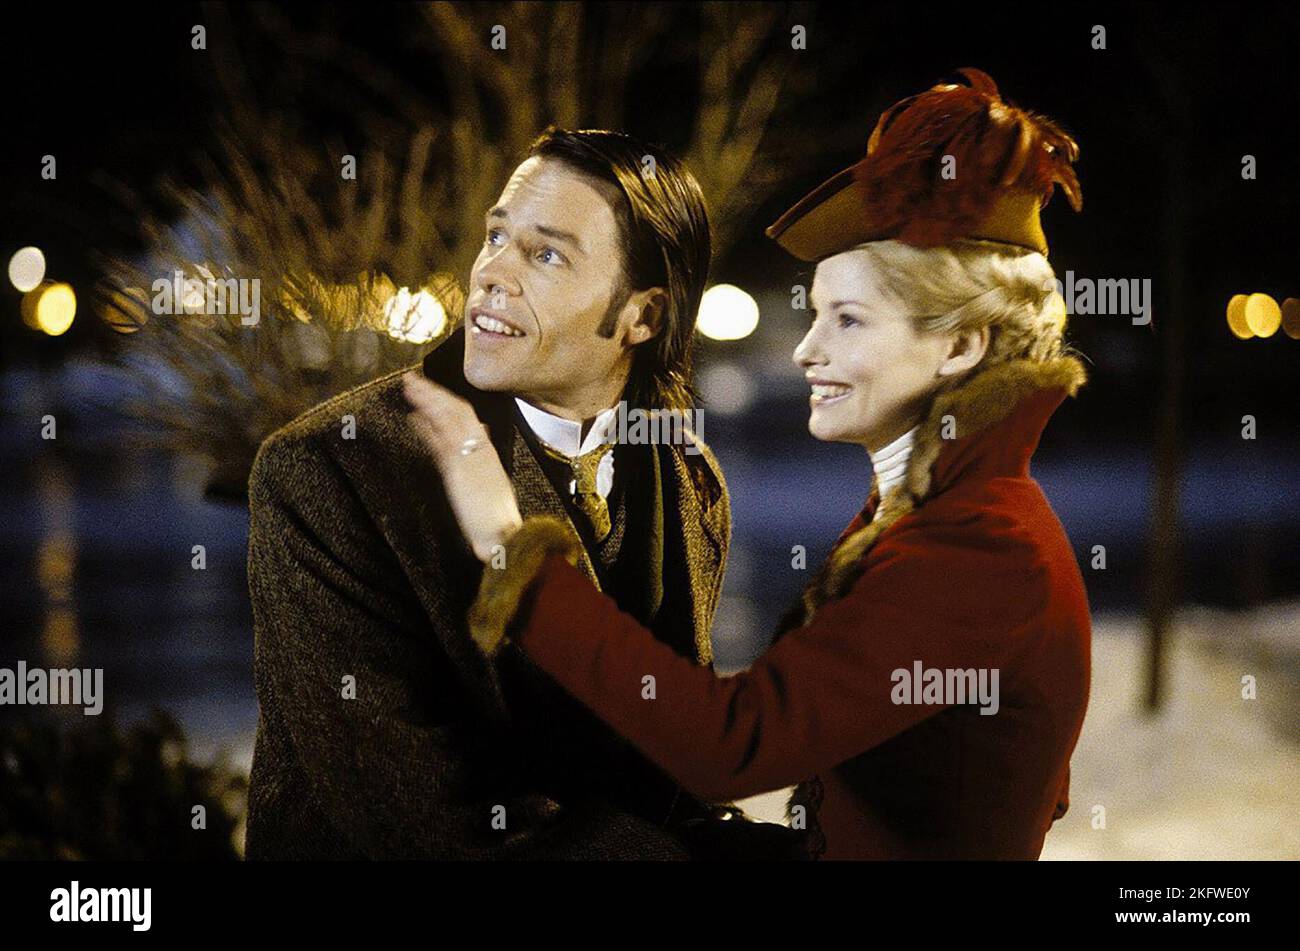 GUY PEARCE, SIENNA GUILLORY, THE TIME MACHINE, 2002 Stock Photo